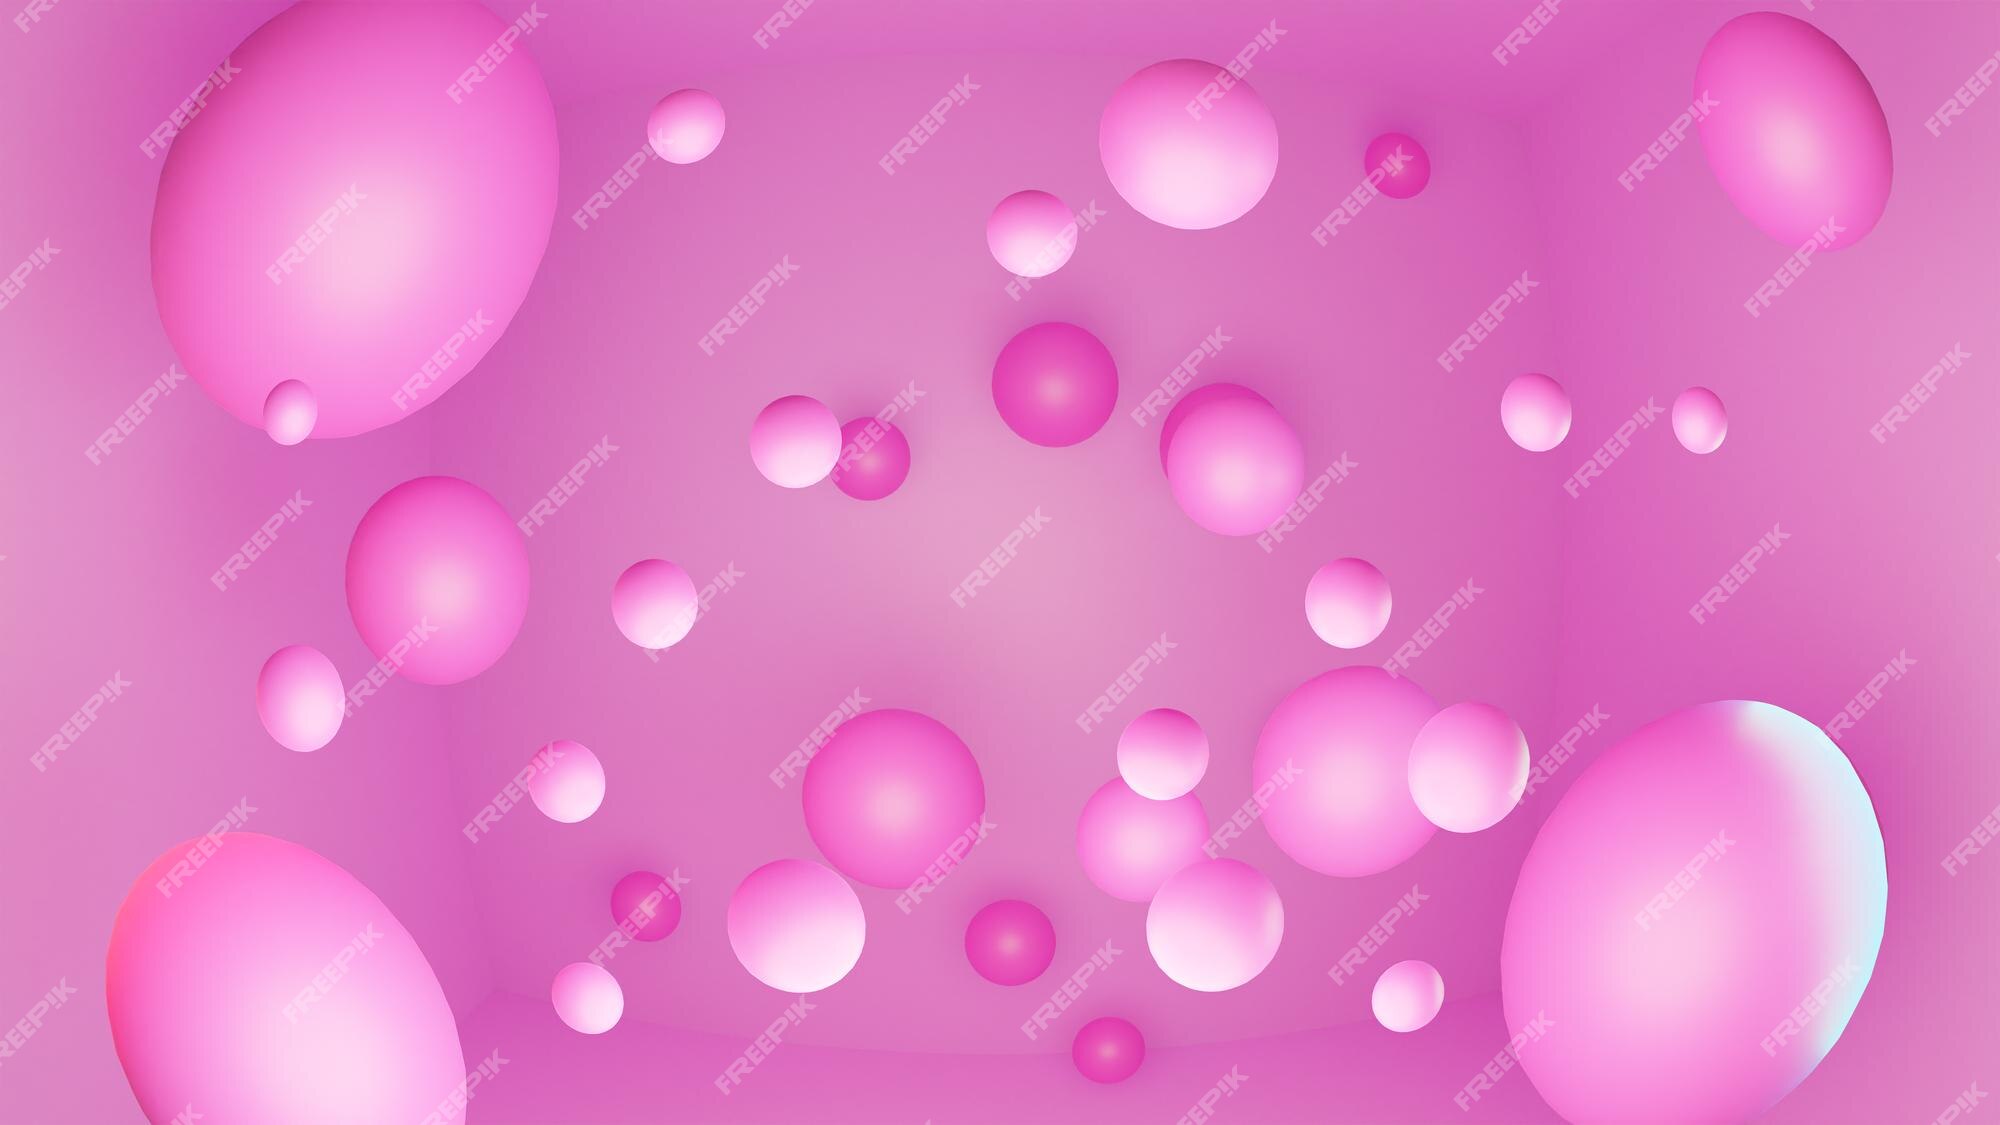 Pink Bubbles Images - Free Download on Freepik